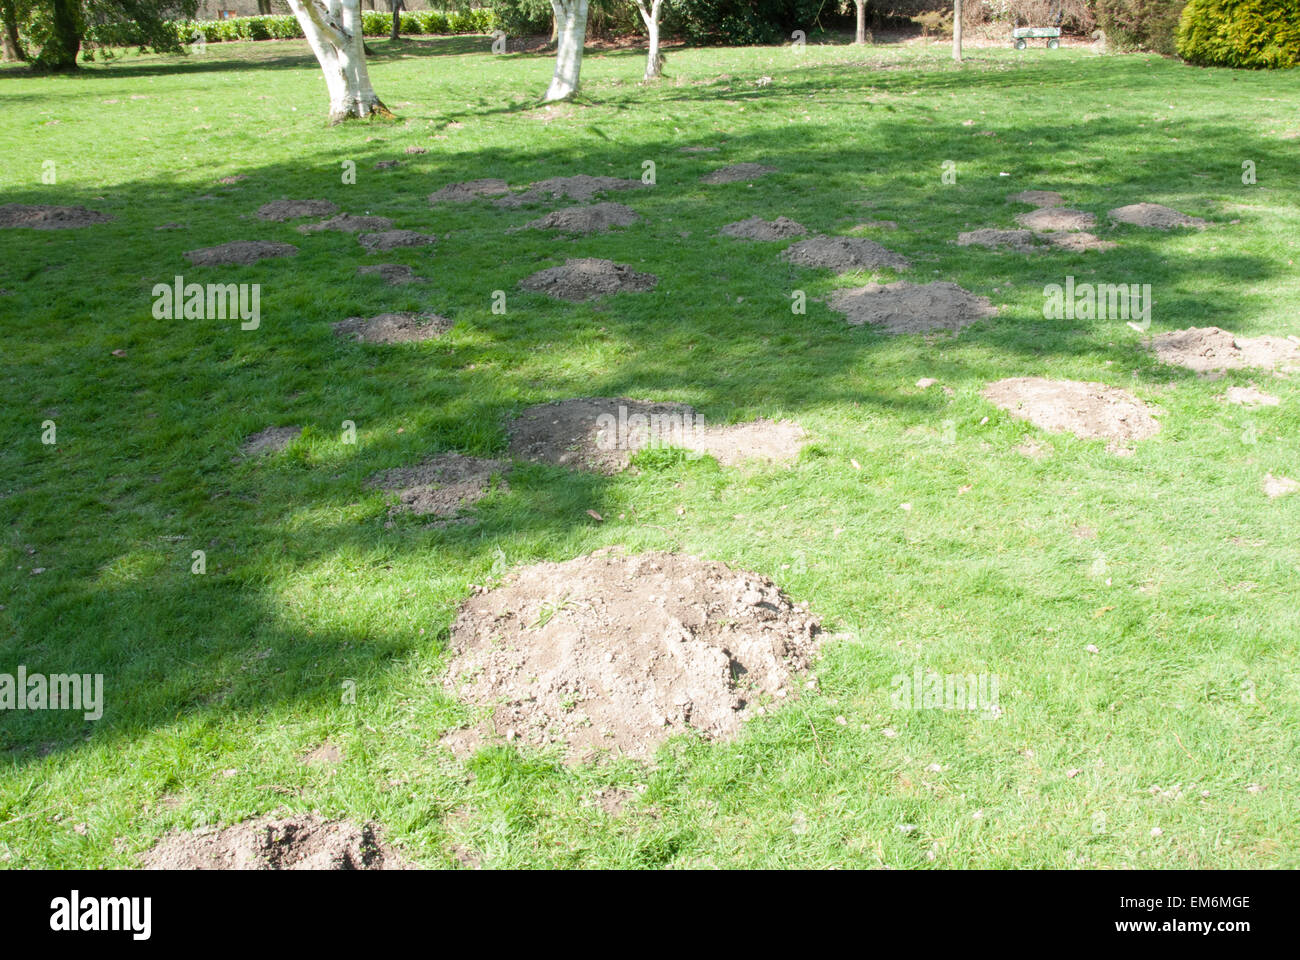 Excavated mounds of soil (molehills) at Langley Park in Buckinghamshire Stock Photo